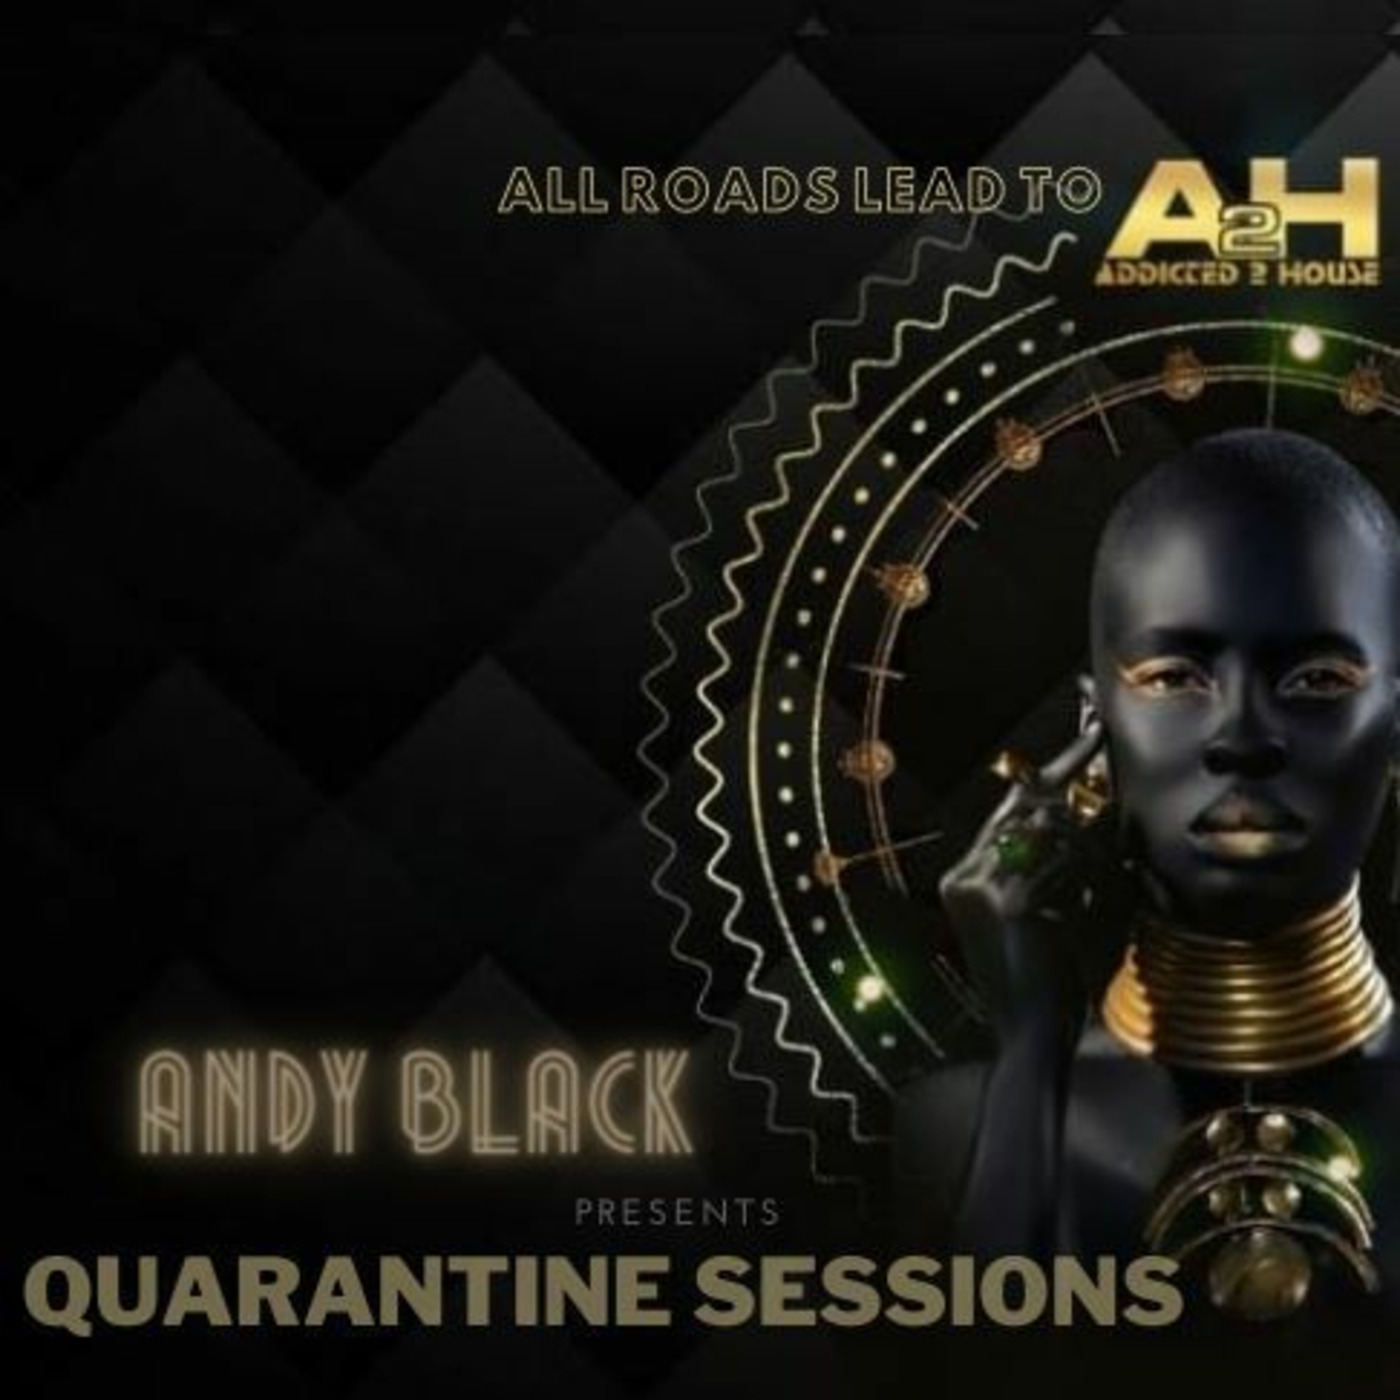 Andy Black #Quarantine Sessions - Deep House (Road2Addicted2HouseAnnualParty) Episode 70